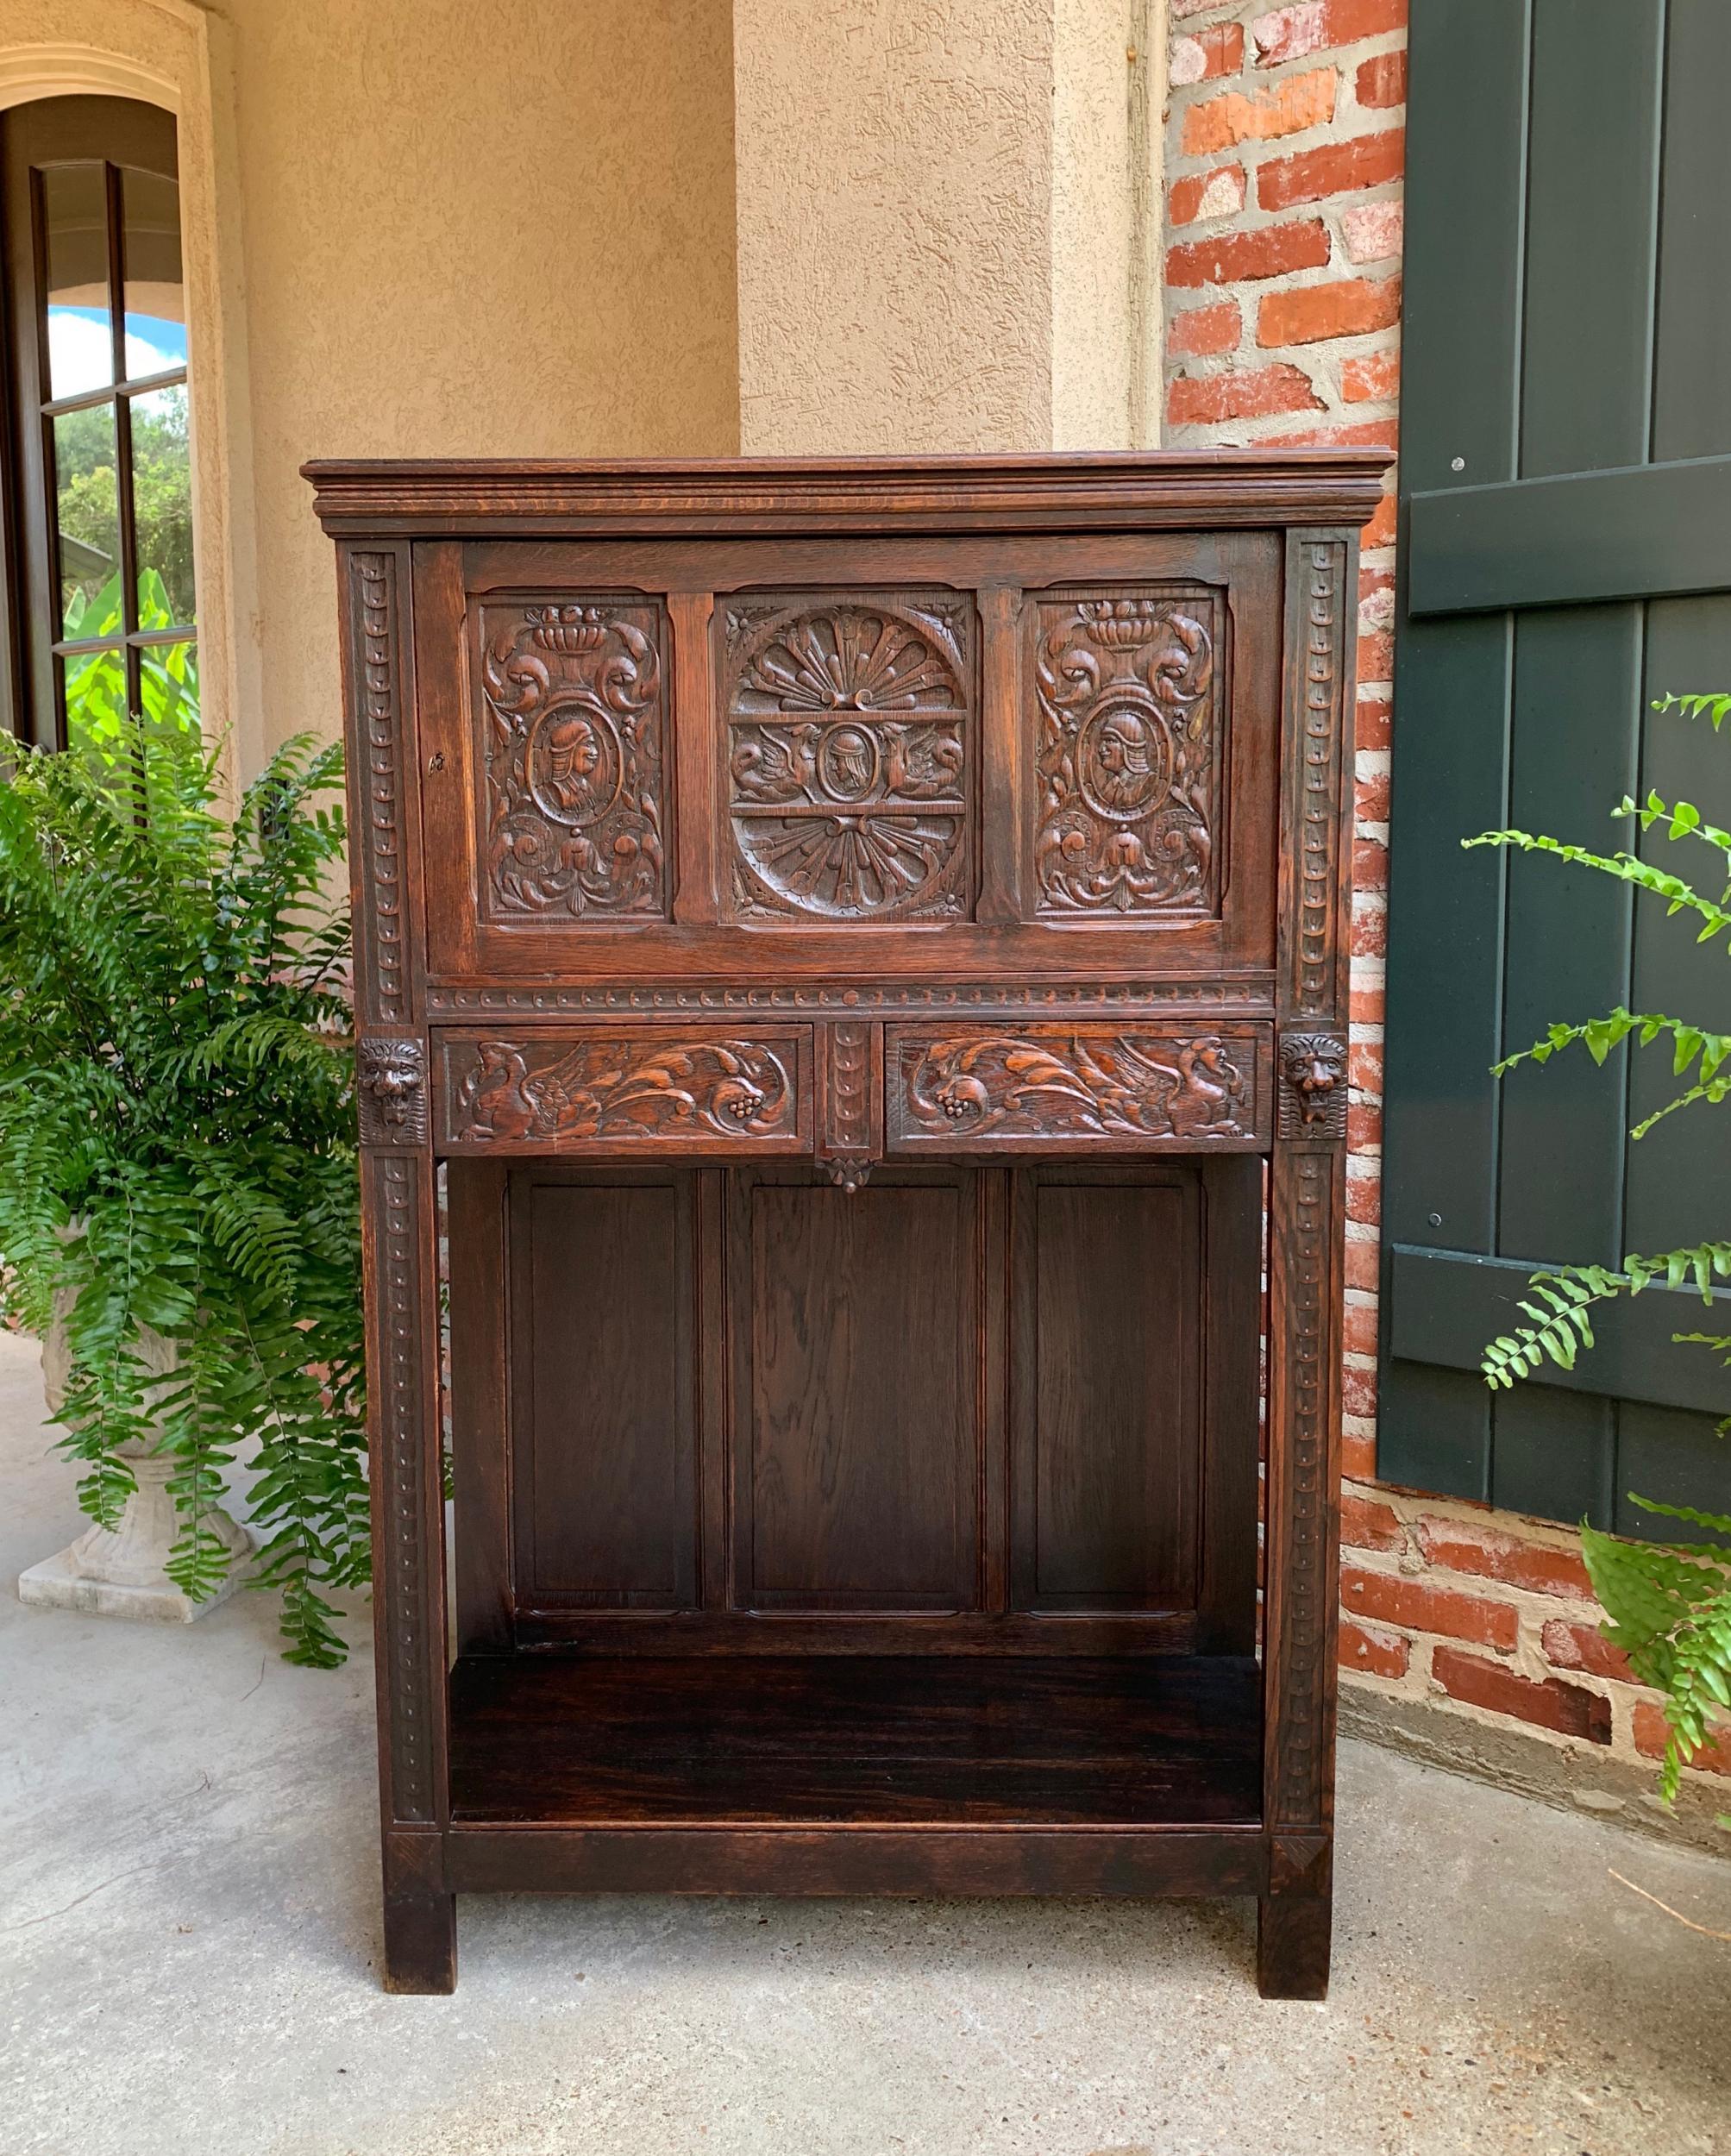 Antique French carved oak renaissance cabinet bookcase court cupboard 19th c.

~Direct from France~
~Unique hand carved designs on this lovely antique French cabinet, in a versatile size and style.~
~Full length upper door has distinctive carvings